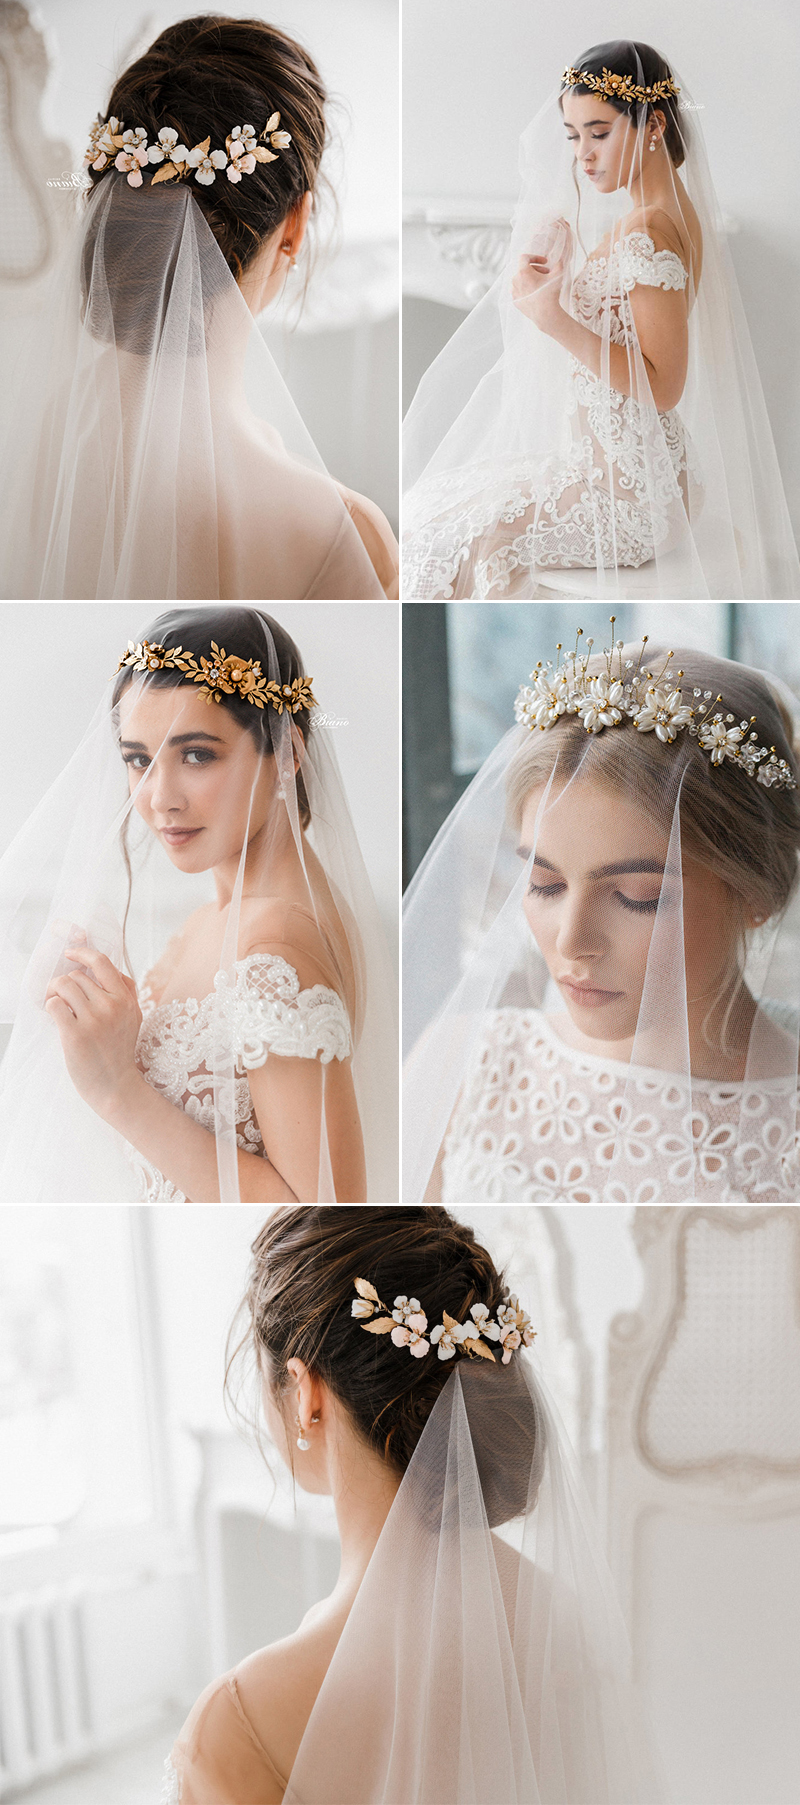 23 Gorgeous Bridal Hair Accessories For Every Wedding hairstyle